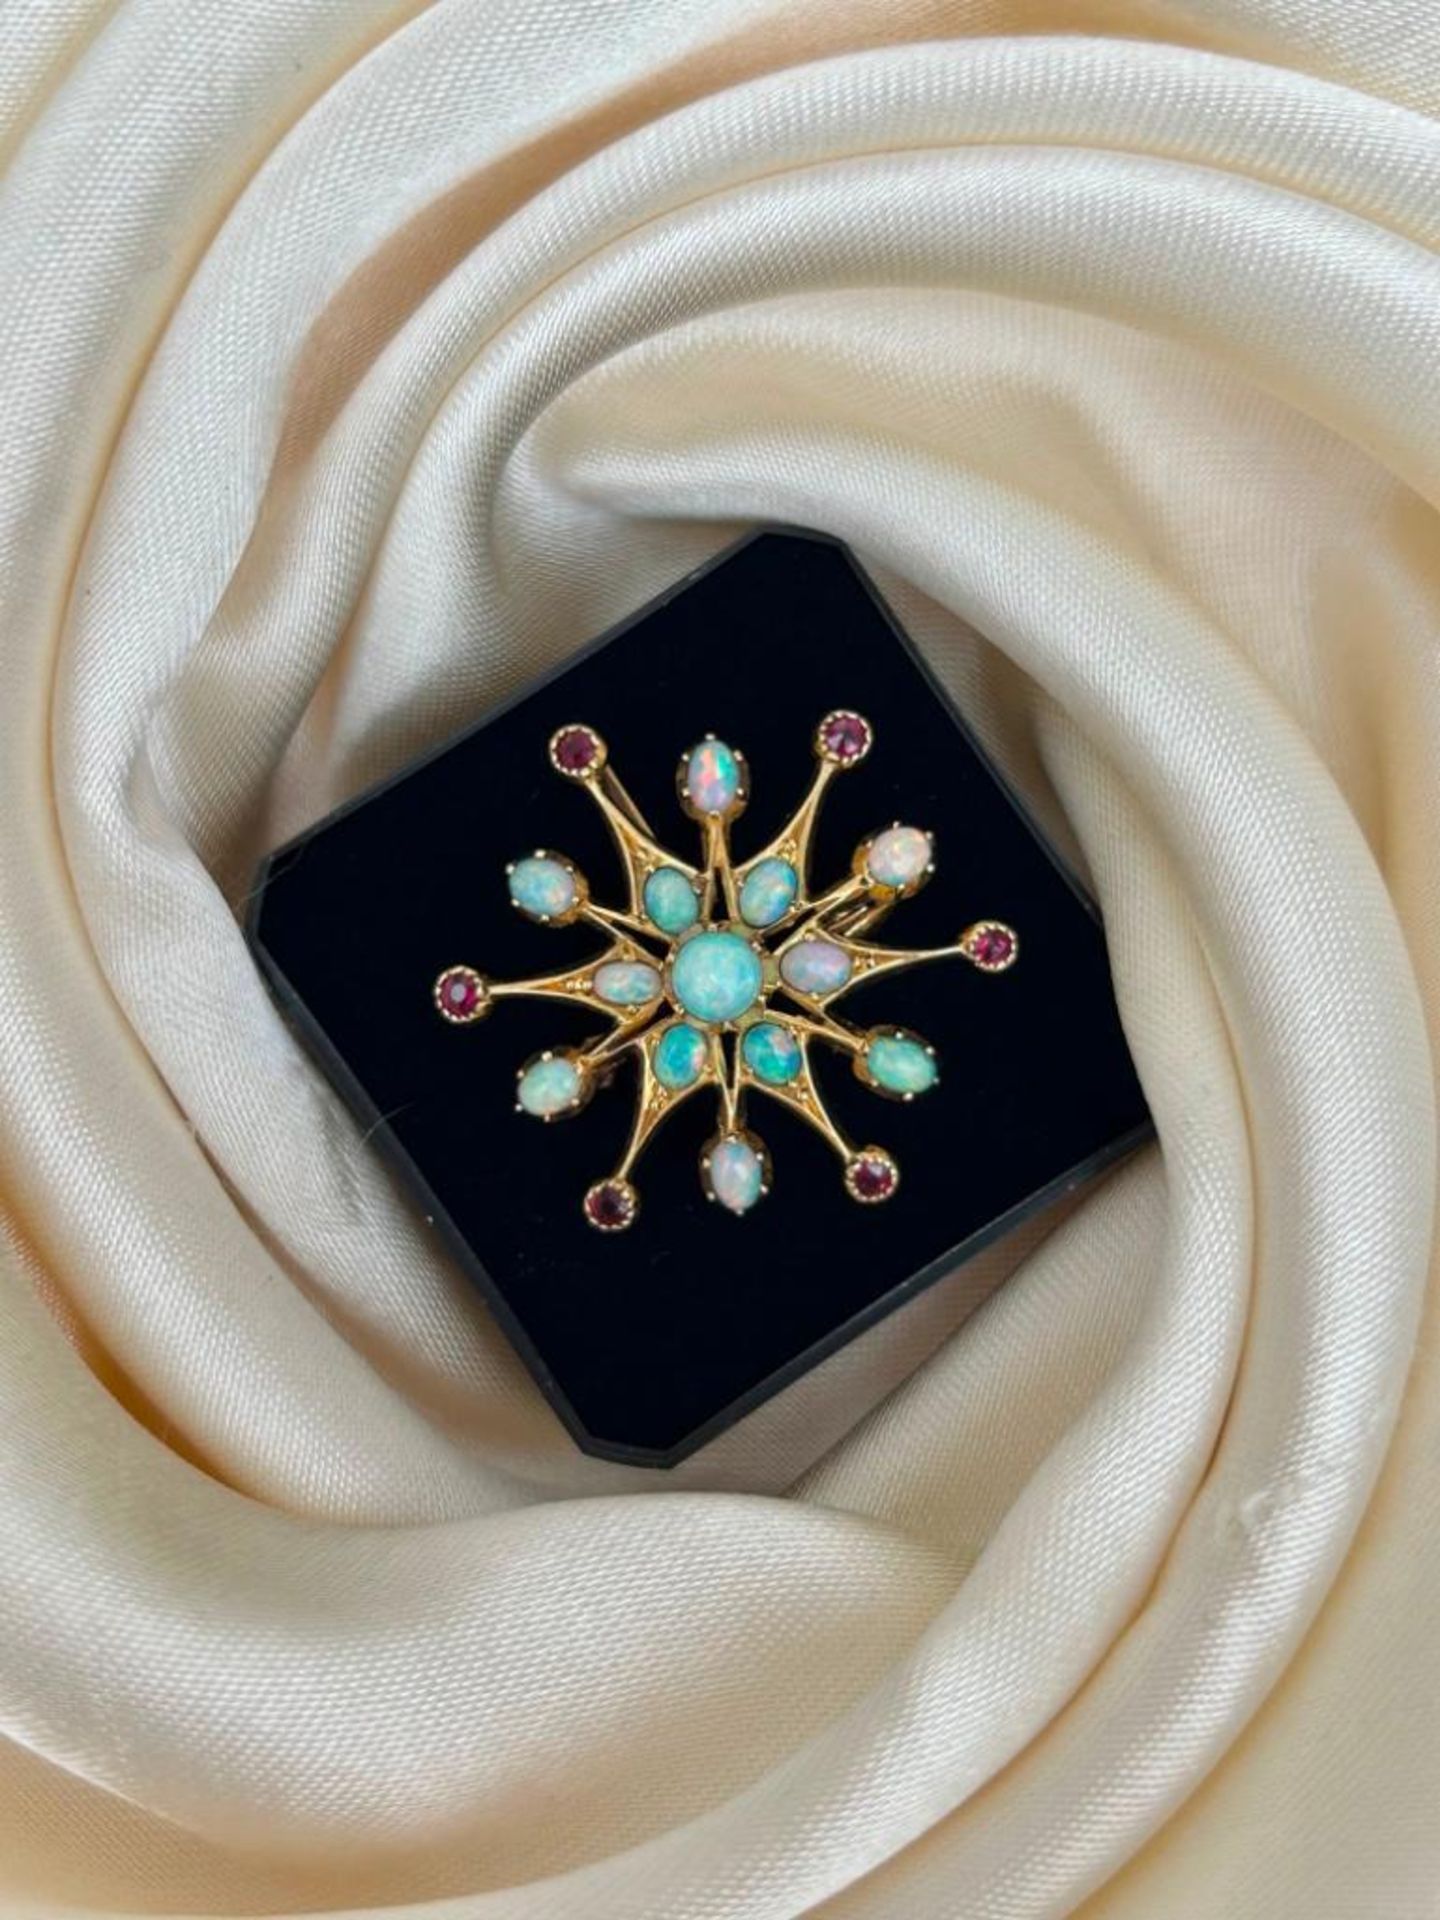 18ct Yellow Gold Ruby and Opal Starburst Brooch / Pendant - Image 5 of 5